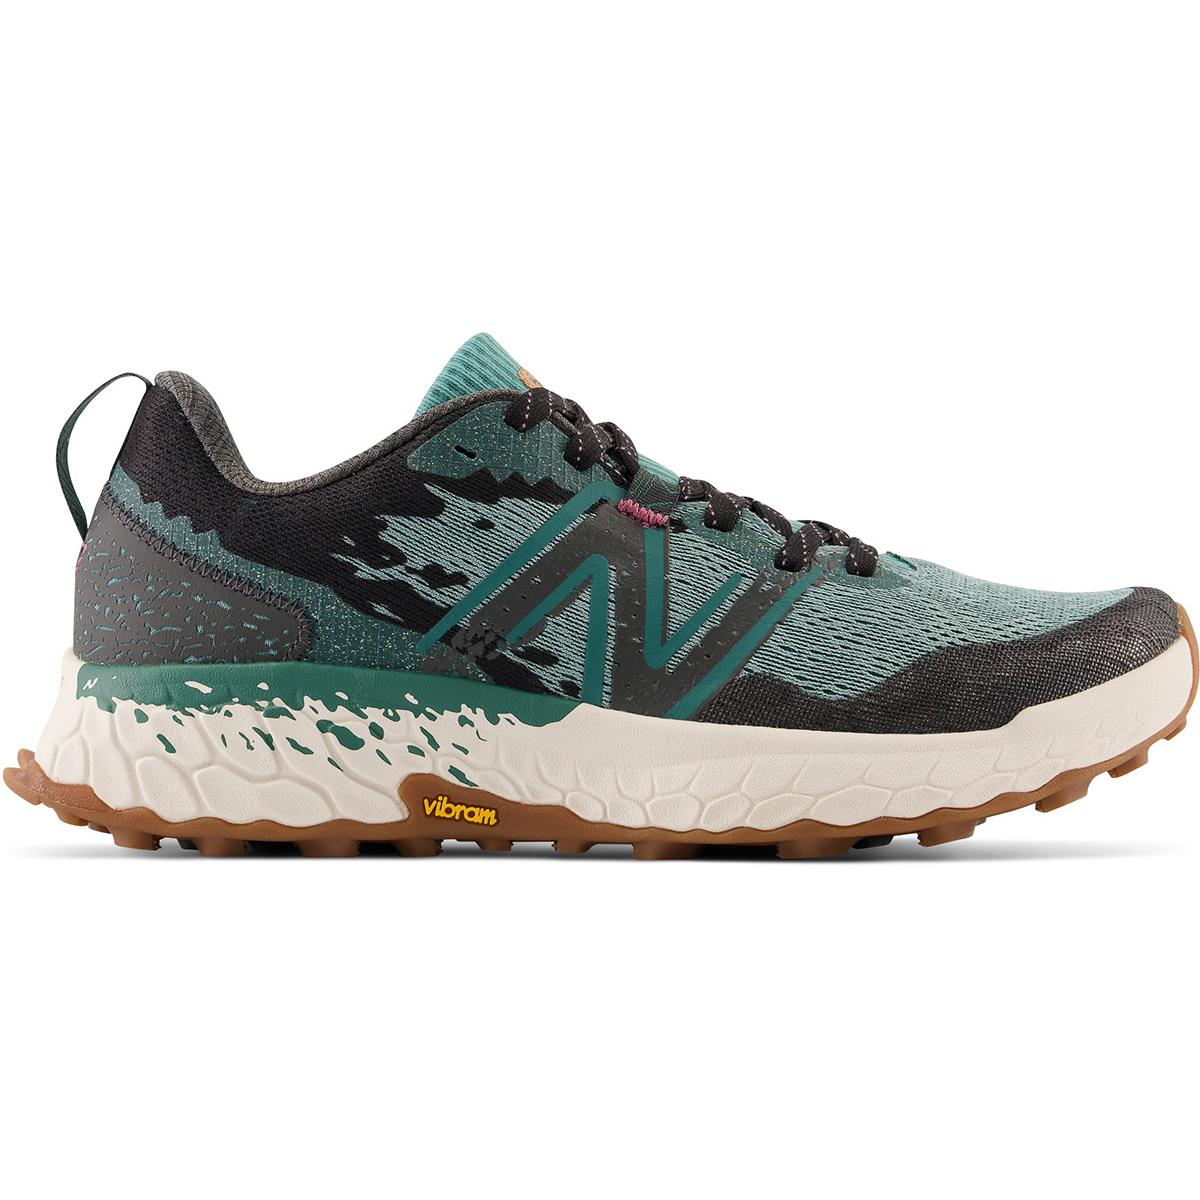 New Balance Hierro V7 Trail Shoes - Faded Teal